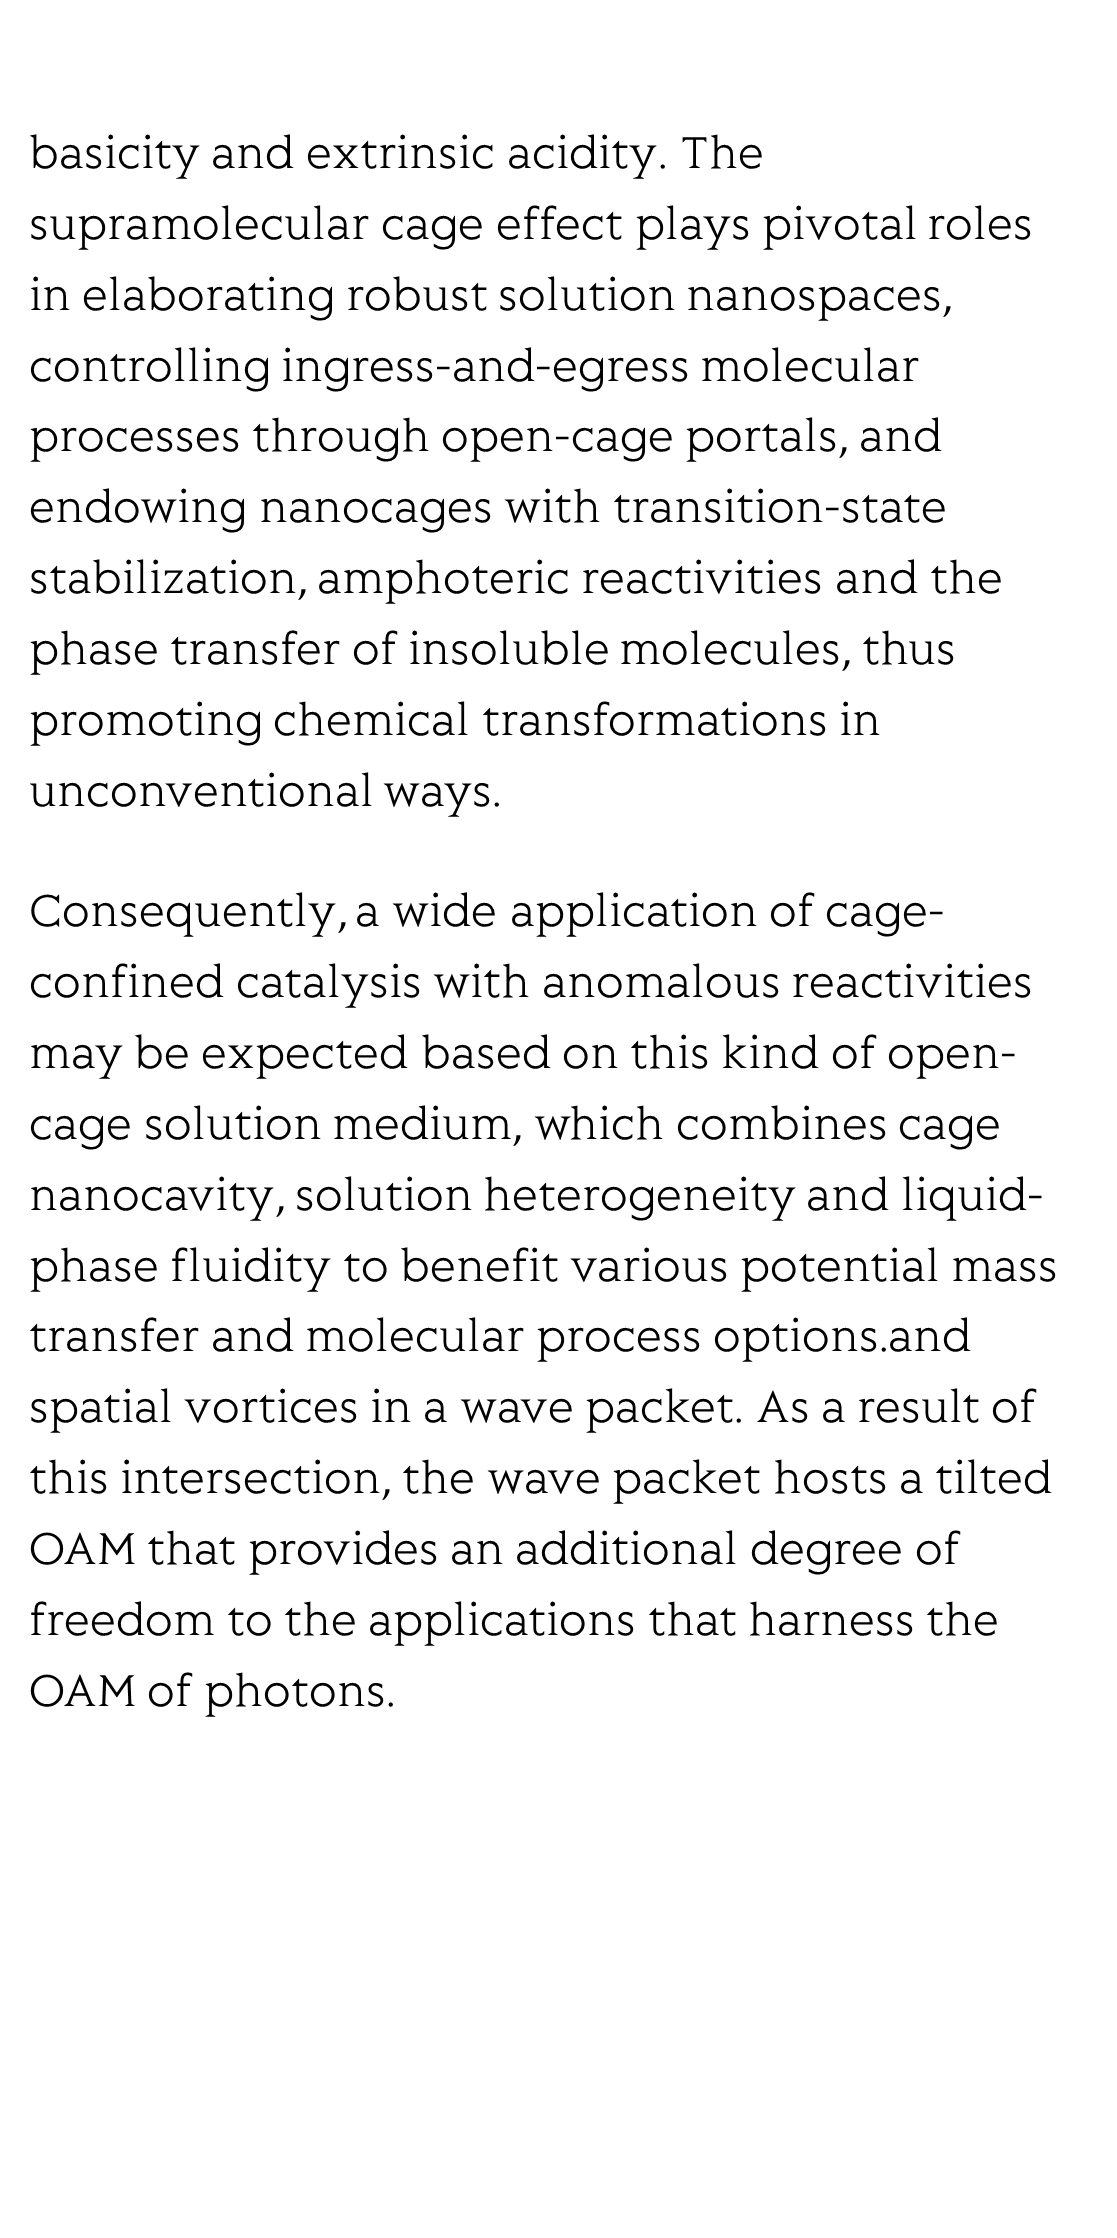 Acidic open-cage solution containing basic cage-confined nanospaces for multipurpose catalysis_3